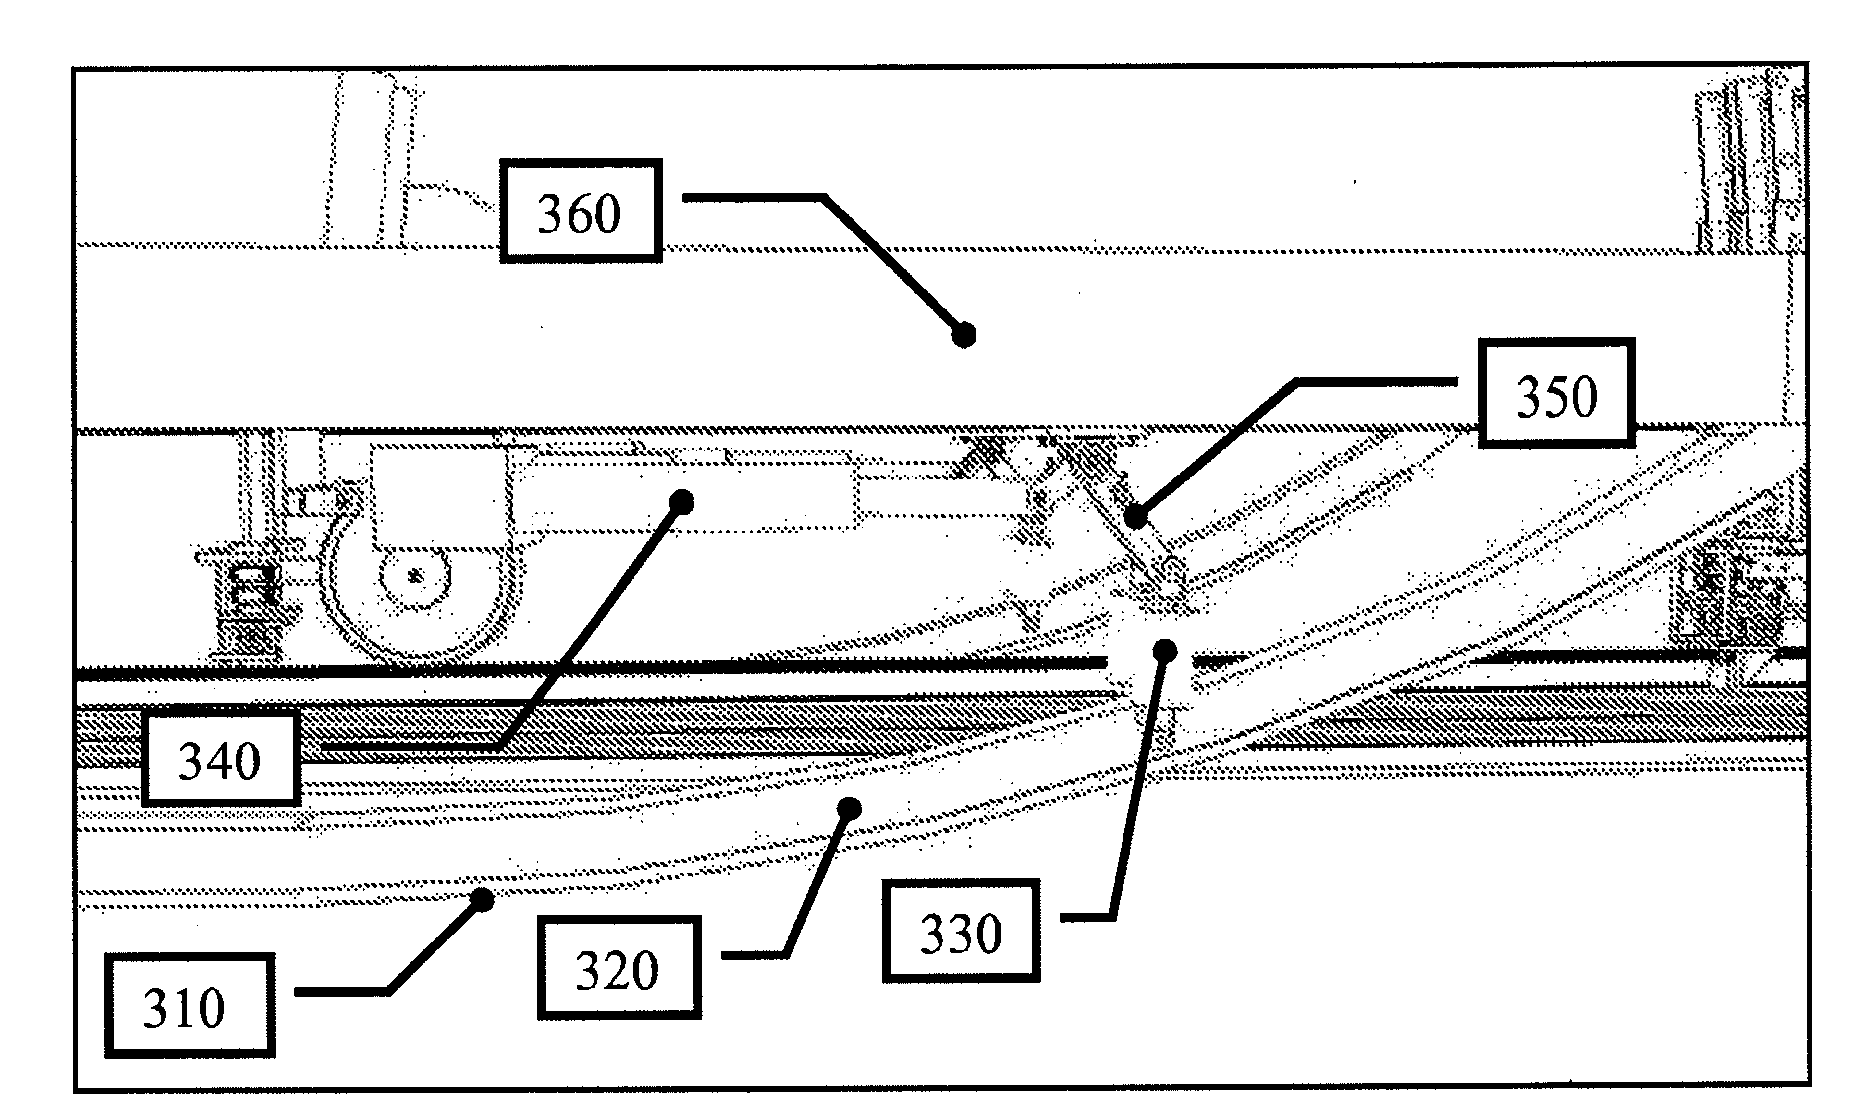 Switching device configured for operation on a conventional railroad track